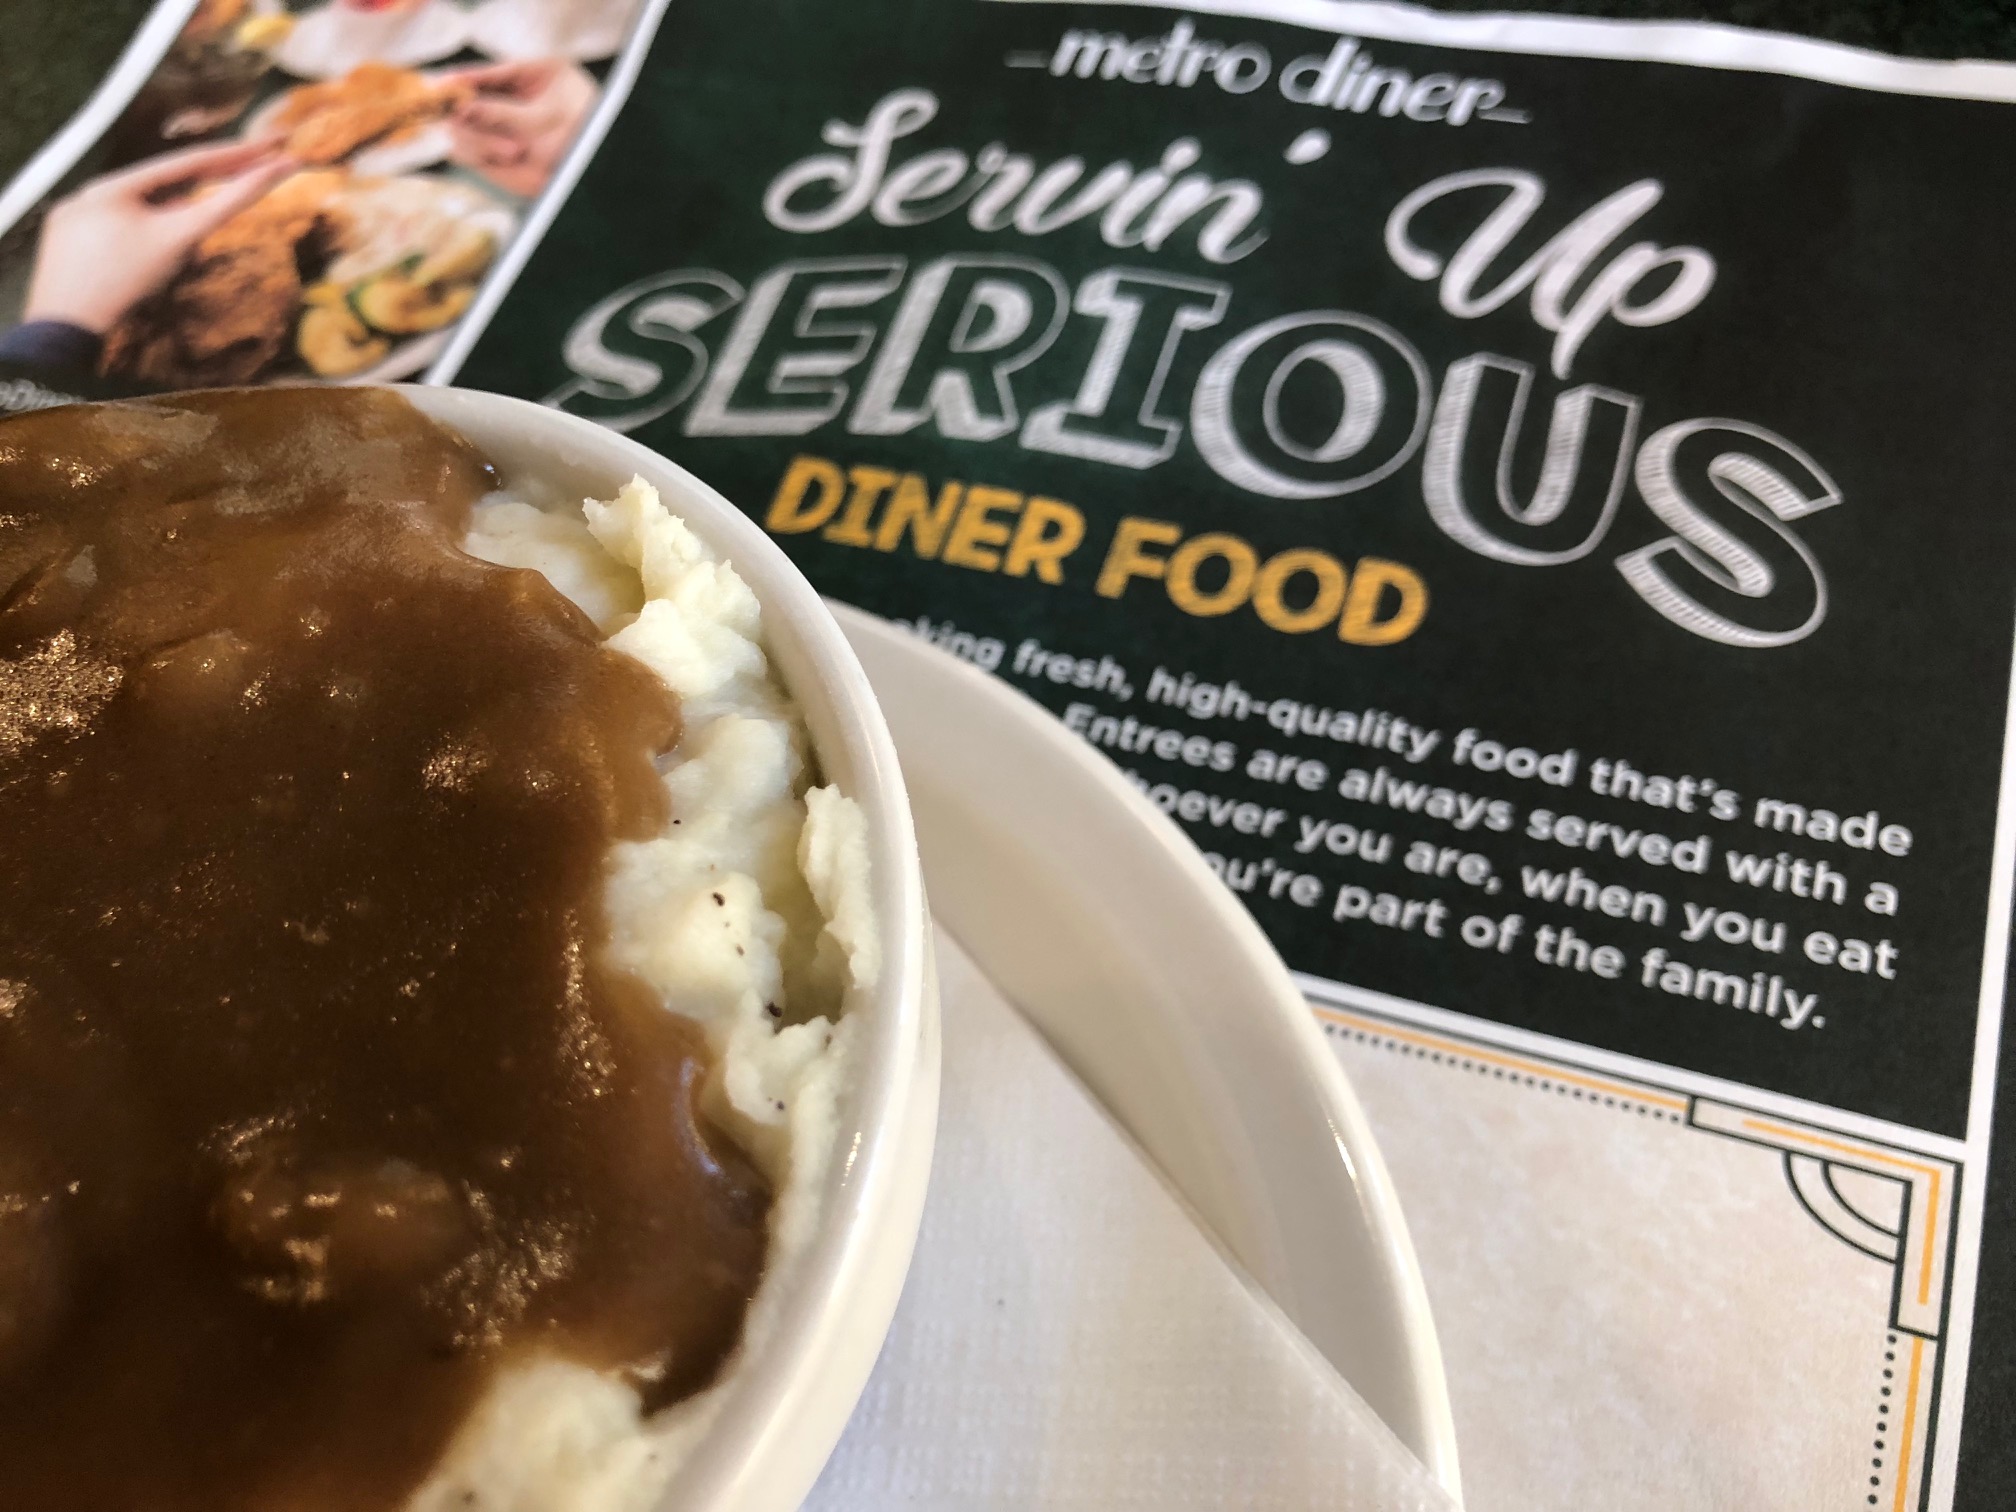 Delicious Diner Food at Metro Diner in Cape Coral | Fort Myers Restaurants Florida Food Blogger | SWFL foodies | diners in Florida | Where to eat in Cape Coral Florida | Mandy Carter food writer | Acupful.com